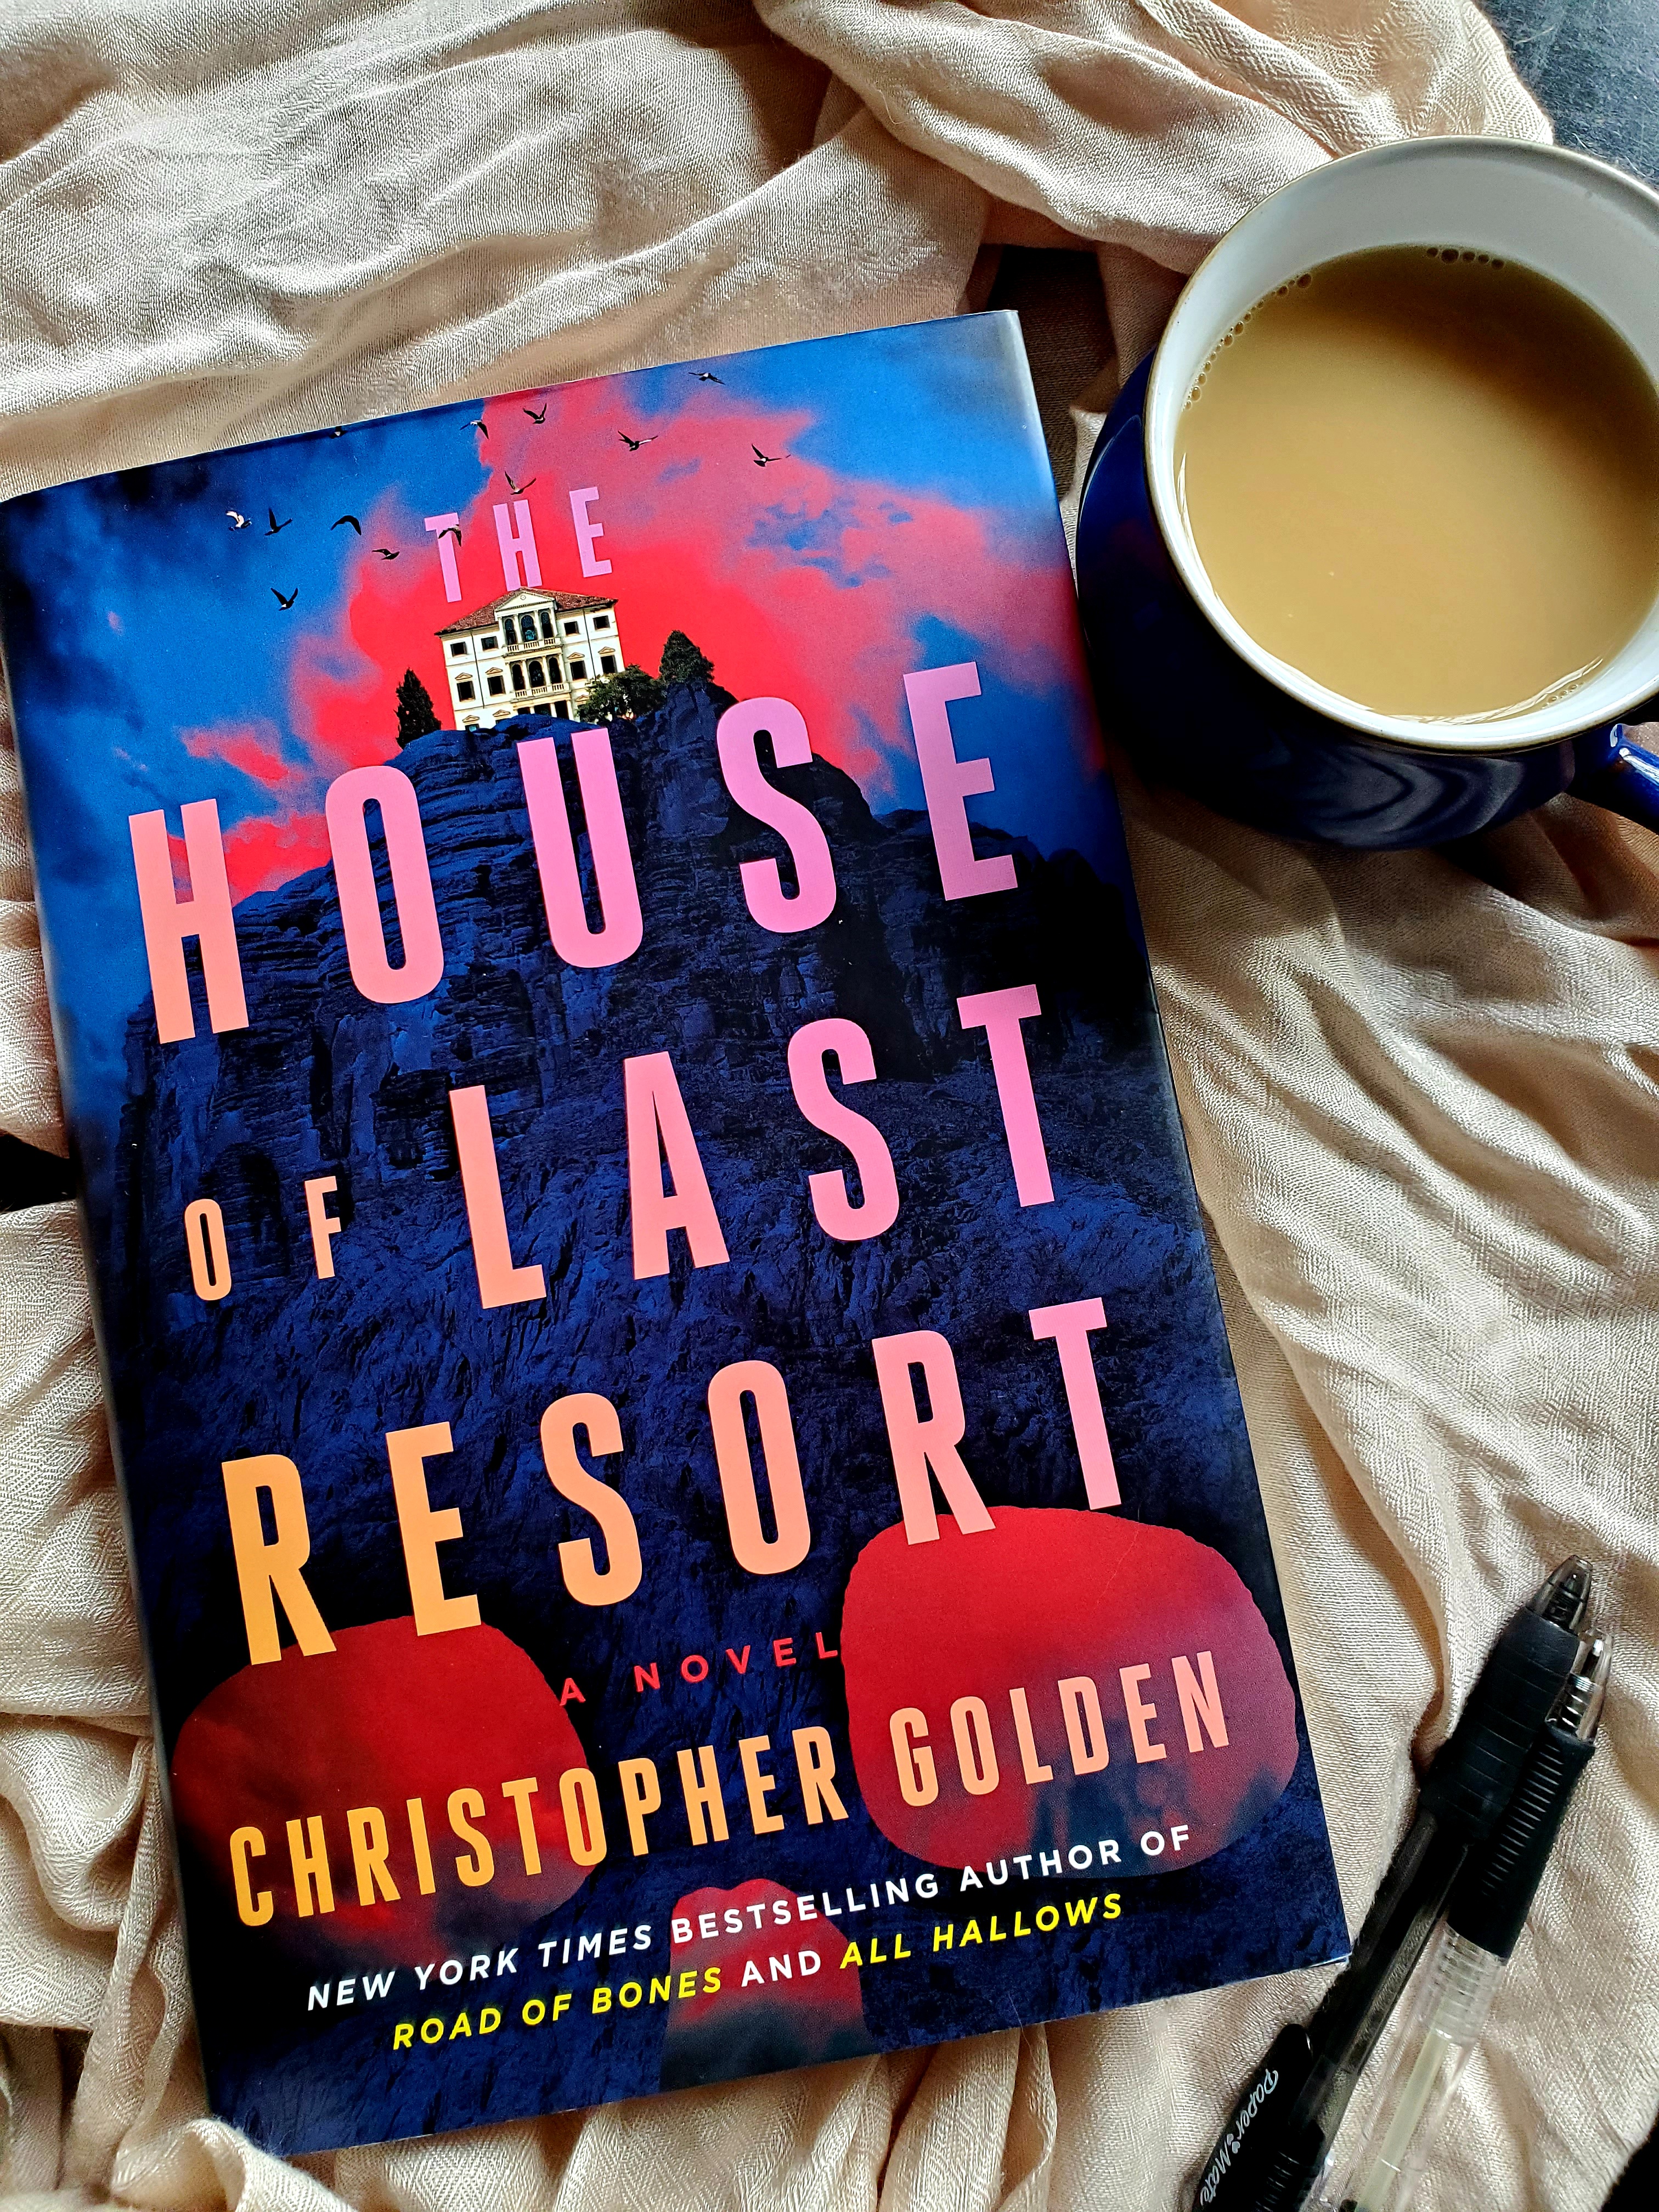 Book cover of THE HOUXSE OF LAST RESORT by Christopher Golden and a mug of tea